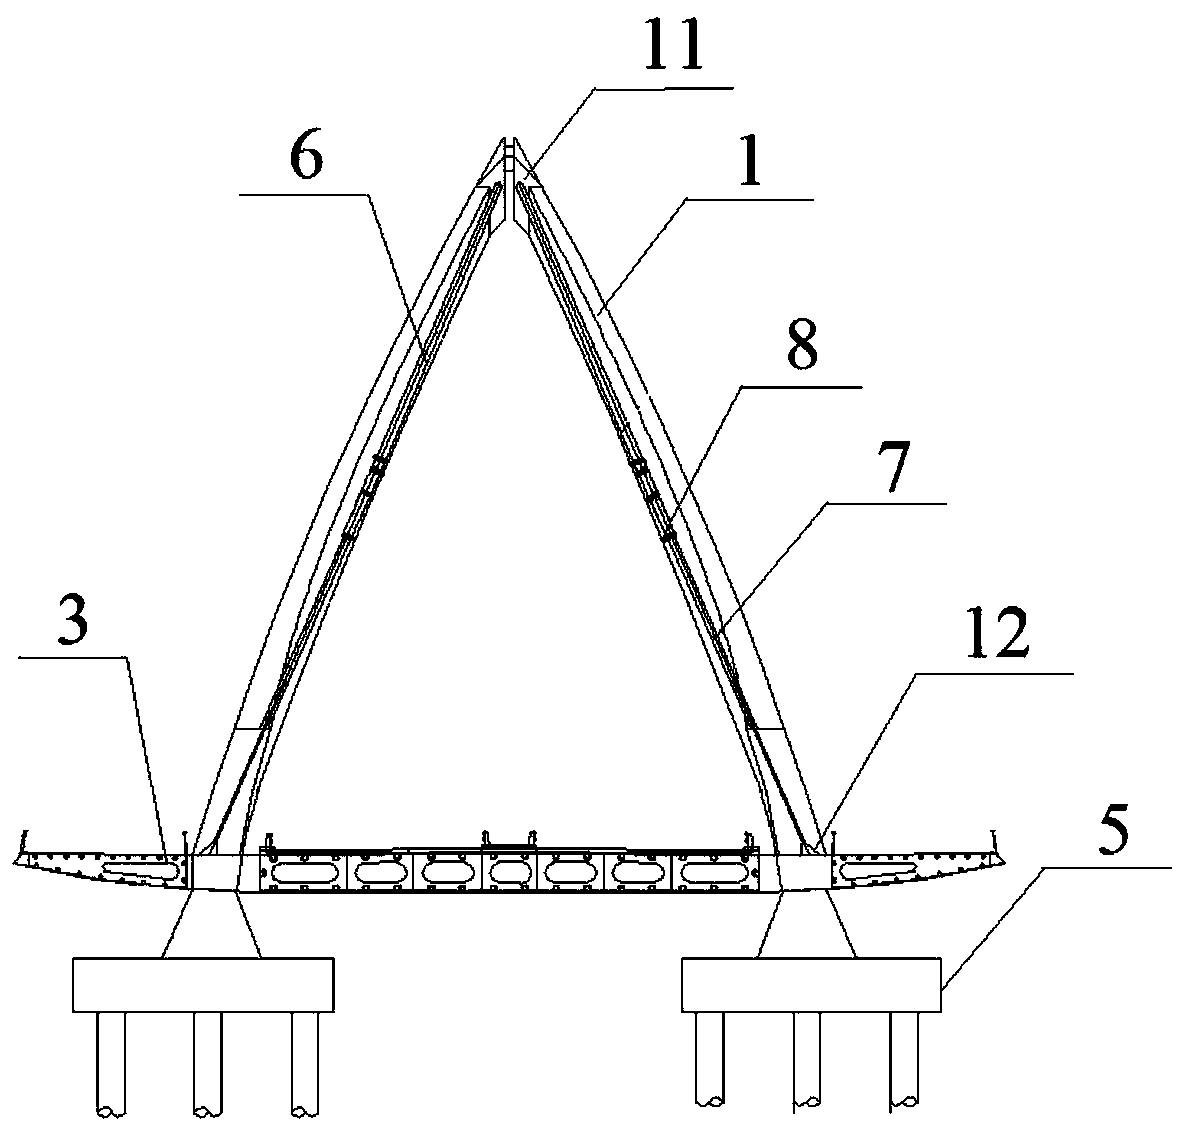 Seagull-type space dorsal cable-stayed bridge system